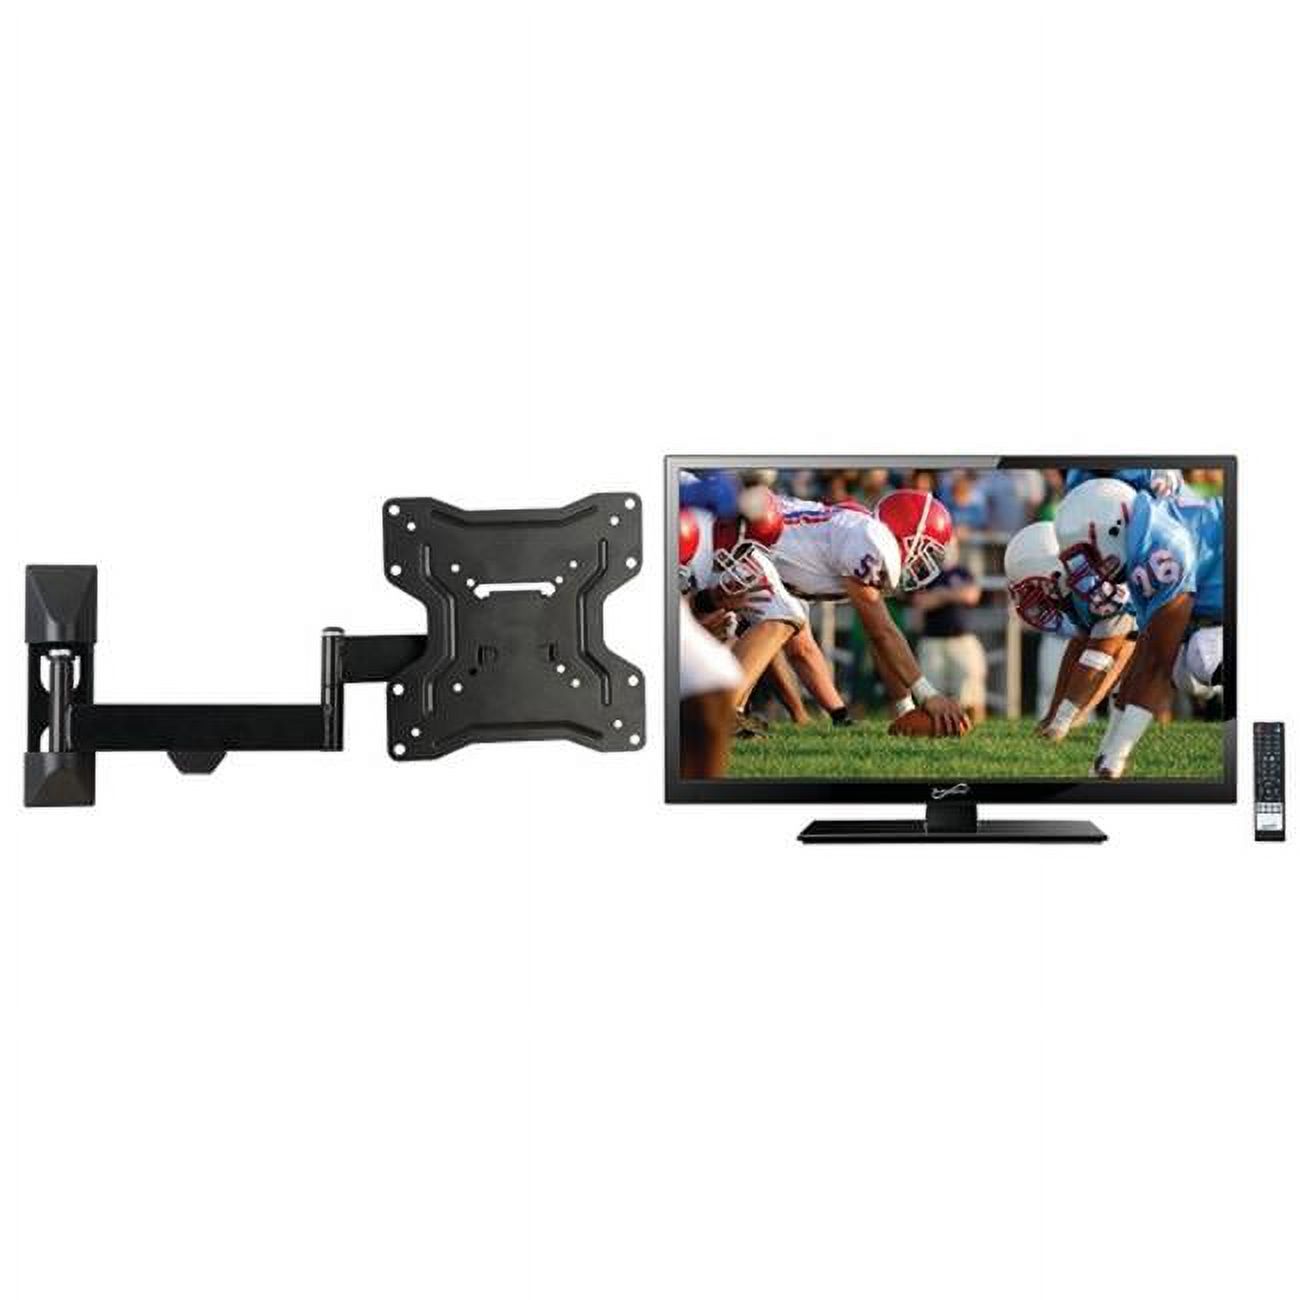 Supersonic 818549028535 19 in. Class HD 720P LED TV & Stanley TMX-102FM Full-Motion Mount - image 1 of 4